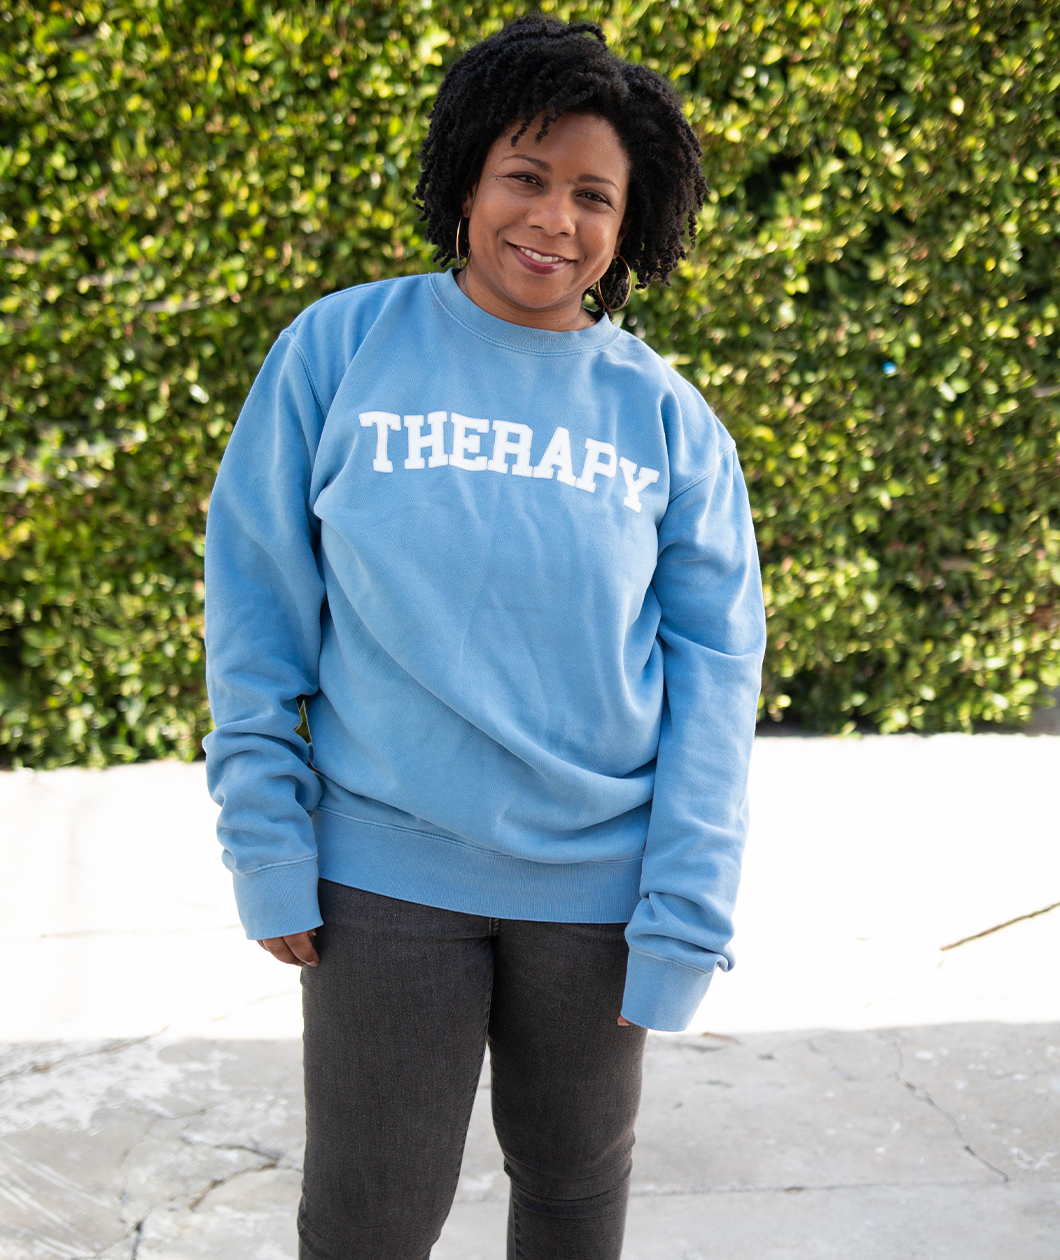 Melisa Monts modeling a light blue crewneck sweater with “Therapy” in white with a gray outline arched across the chest - from Don’t Blame Me